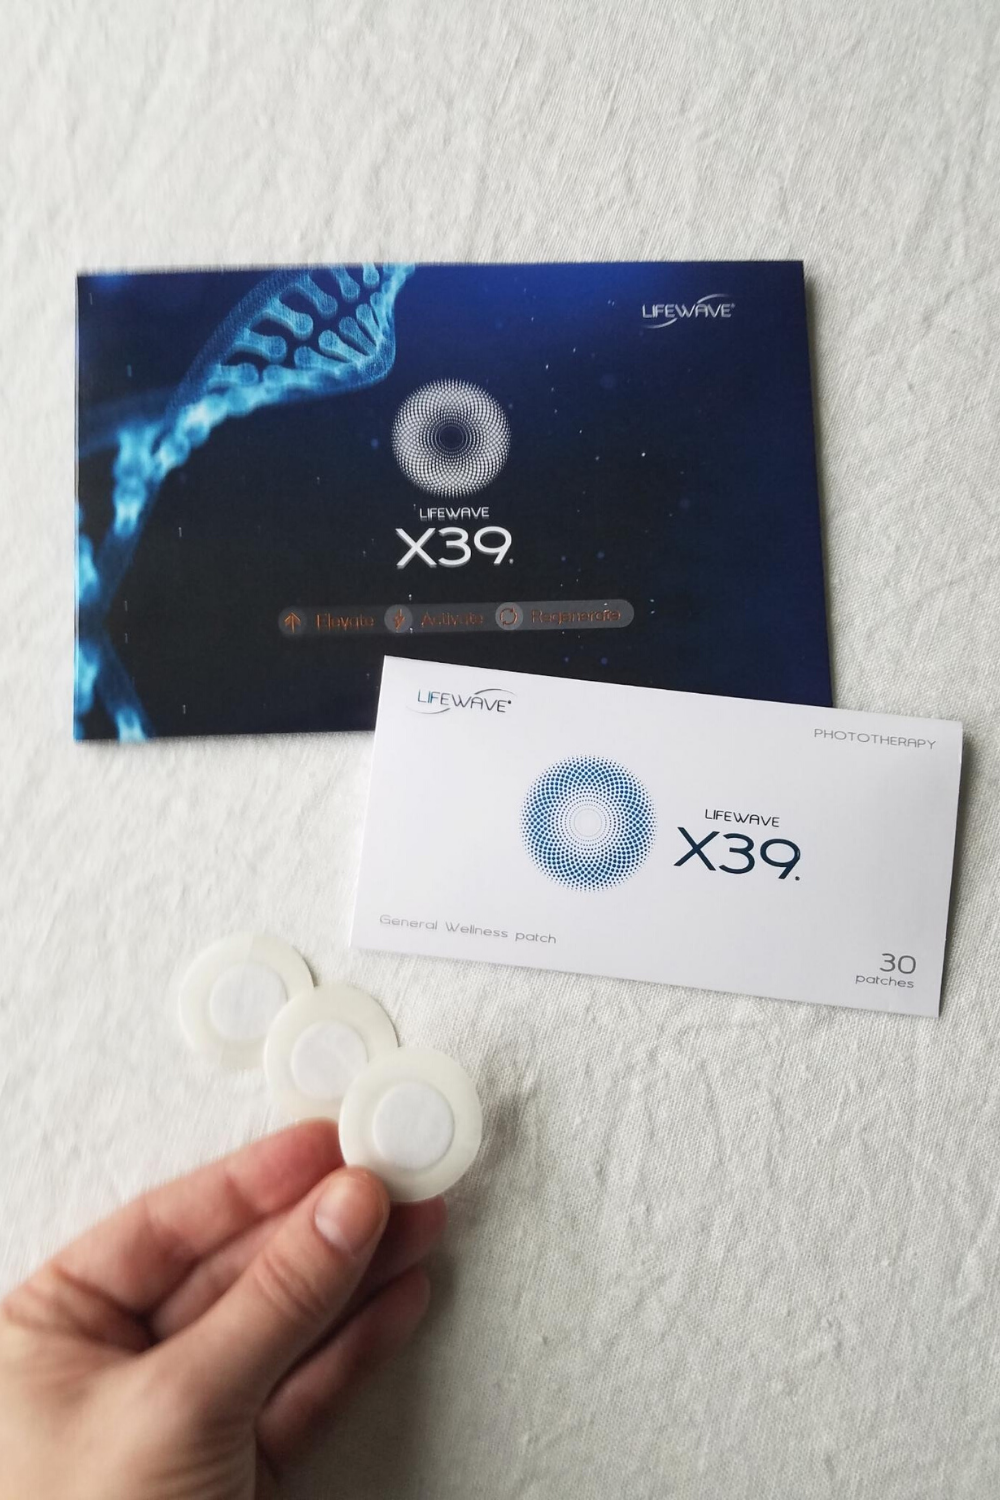 Lifewave Stem Cell Patches